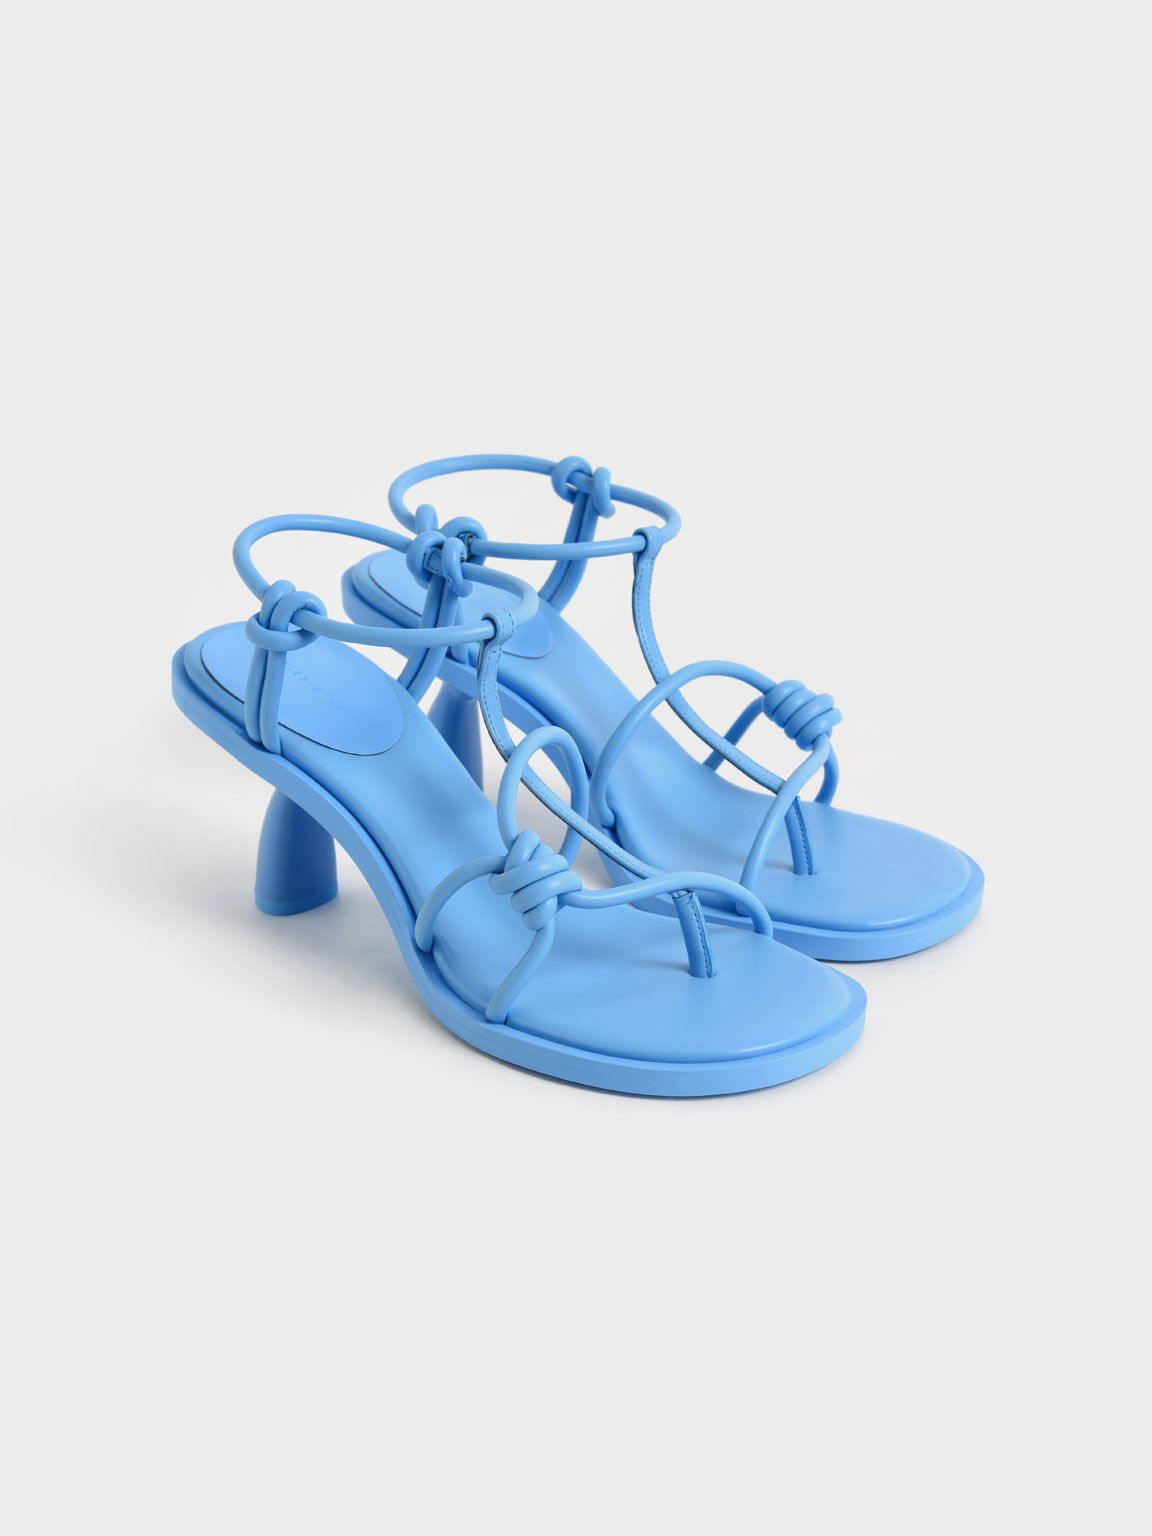 Alma Strappy Knotted Thong Sandals, Blue, hi-res